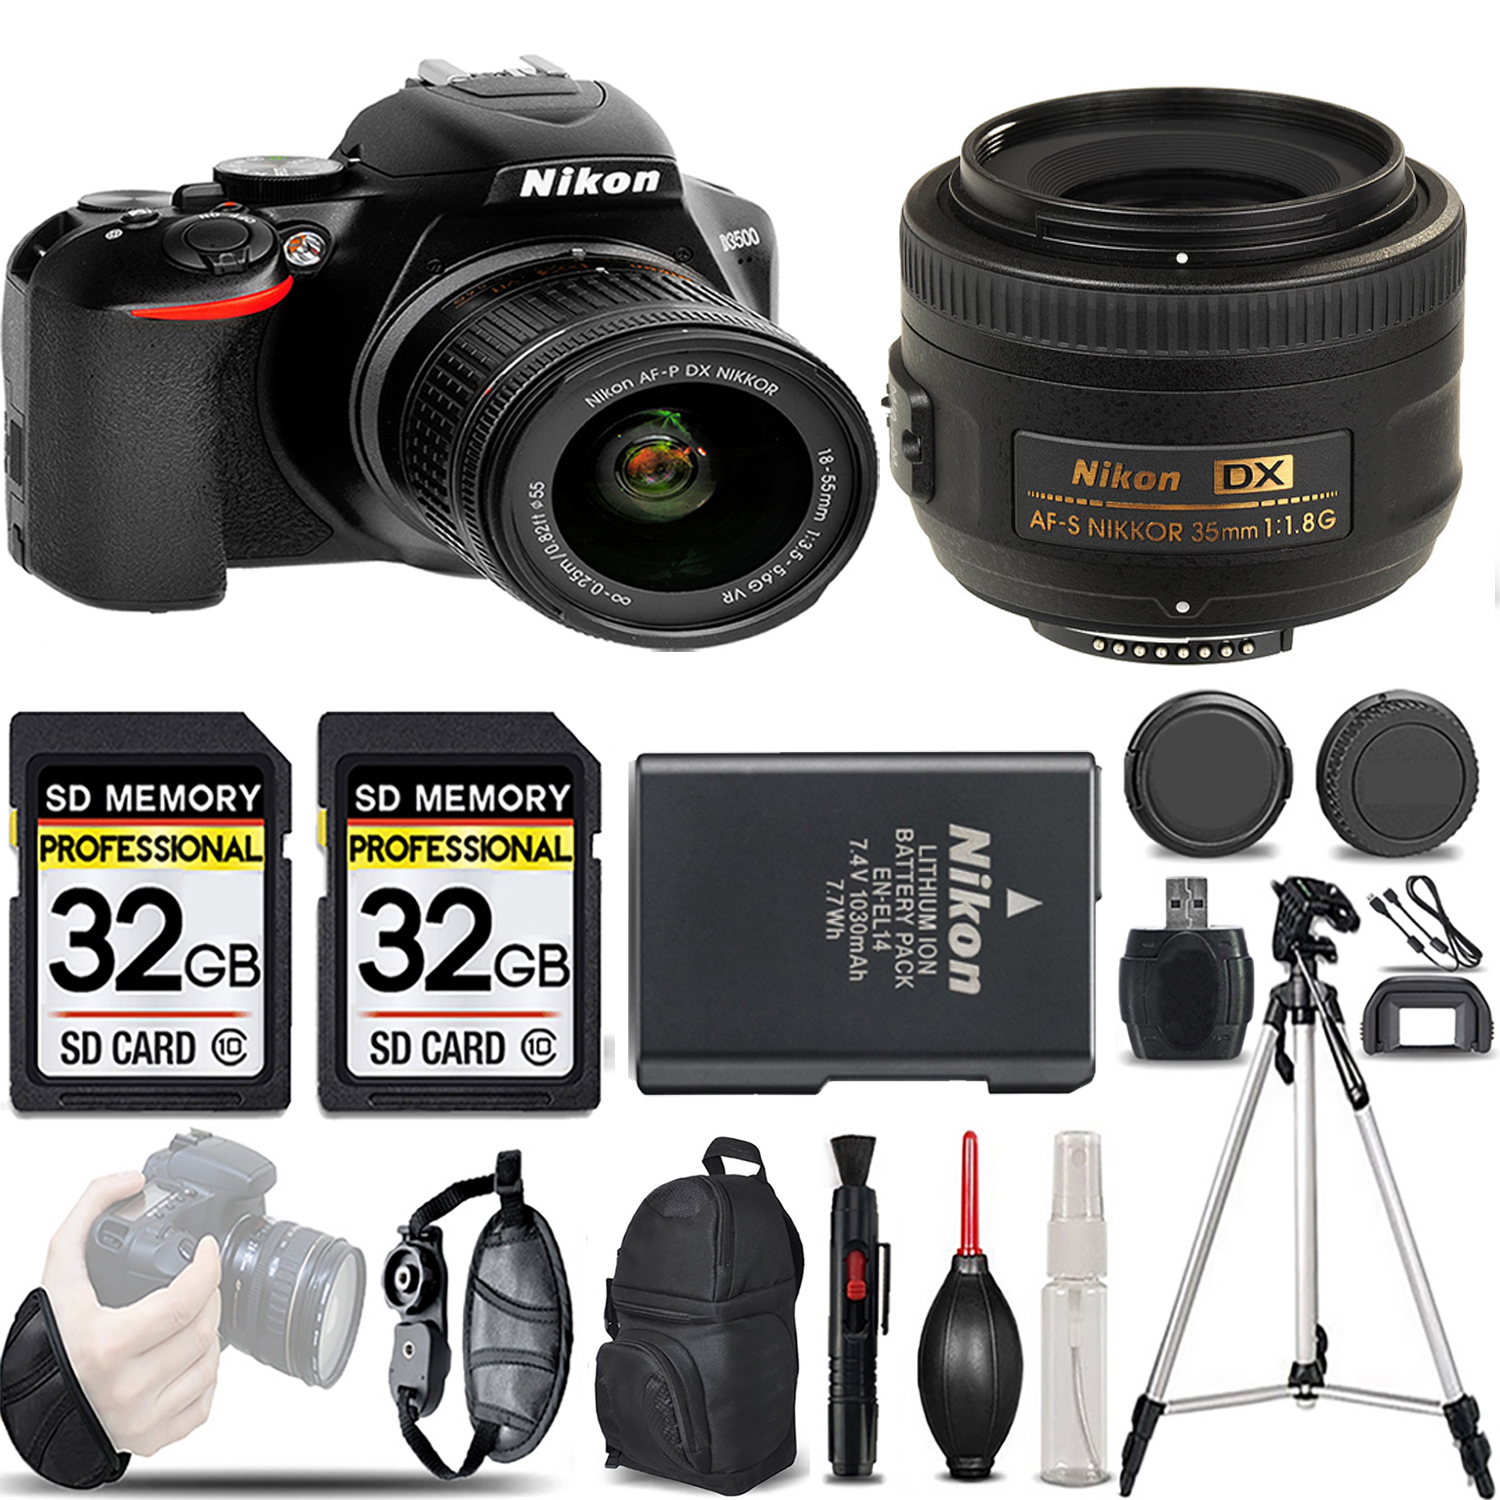 D3500 DSLR Camera with 18-55mm Lens + 35mm f/1.8 G Lens - LOADED KIT *FREE SHIPPING*